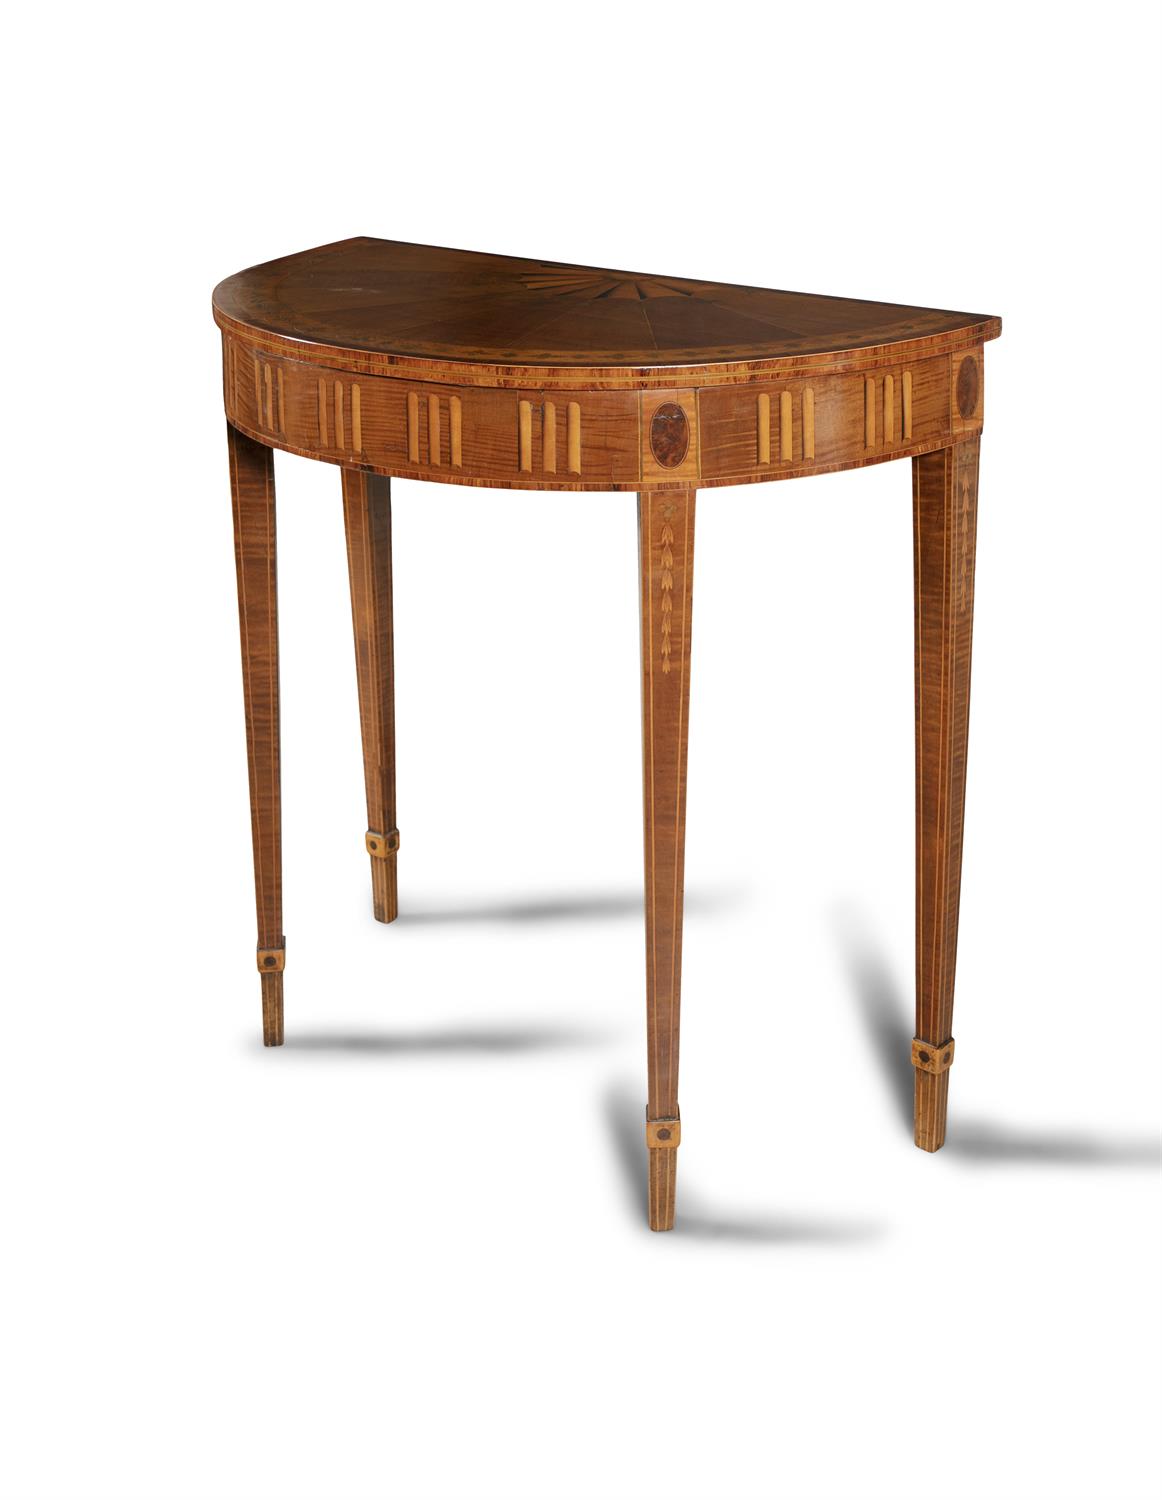 AN IRISH ROSEWOOD BANDED AND SYCAMORE VENEERED D-SHAPED PIER TABLE, c.1780 attributed to William - Bild 2 aus 5